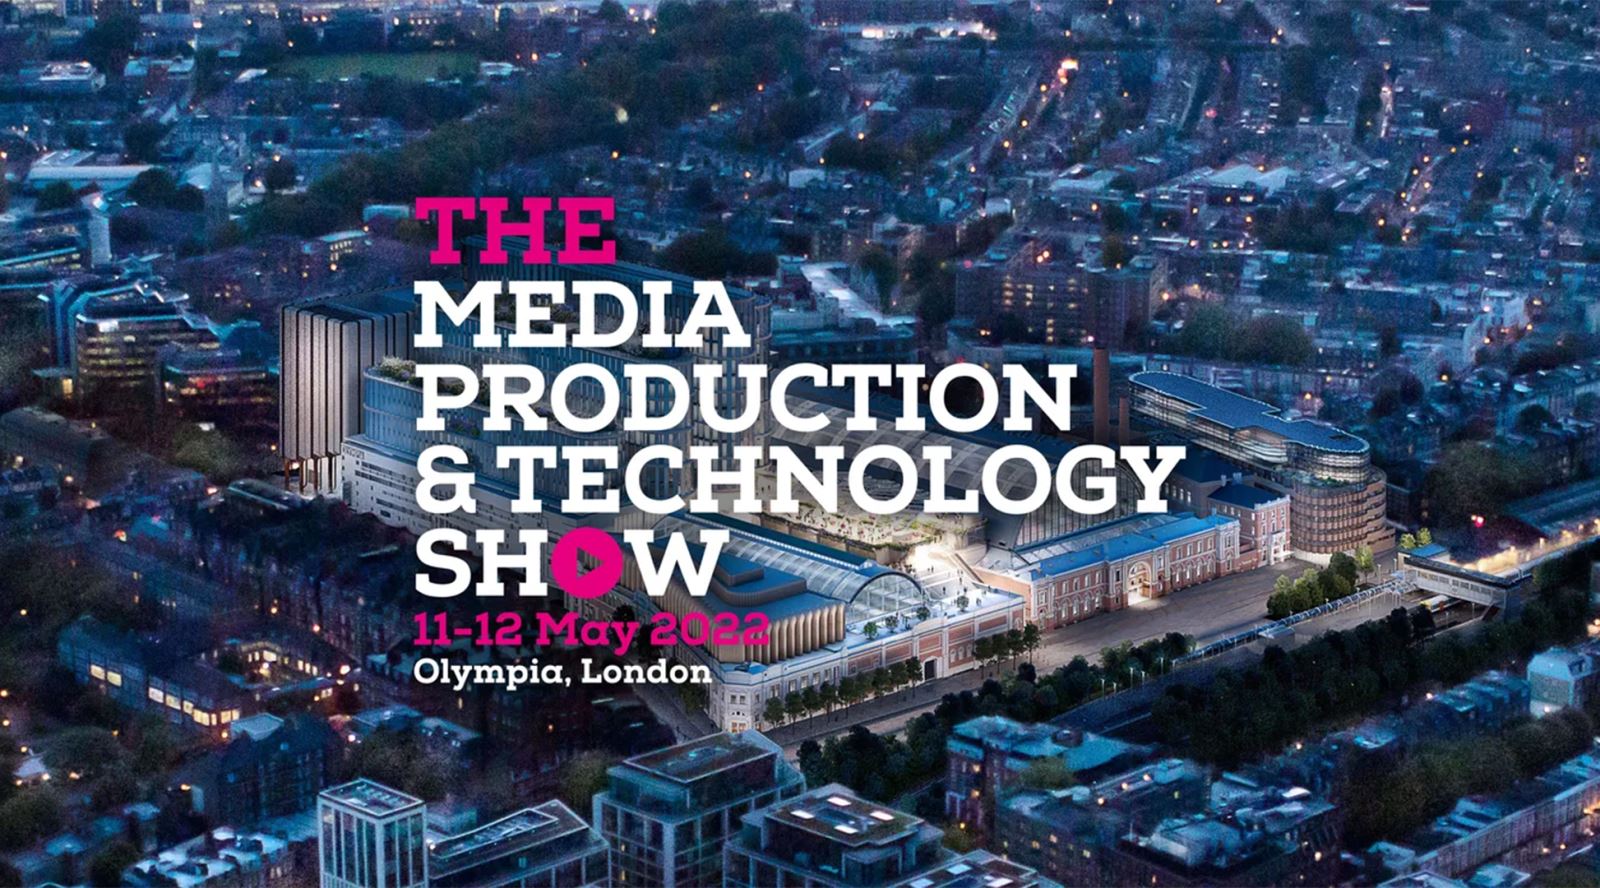 The Media Production and Technology Show returns on 11-12 May